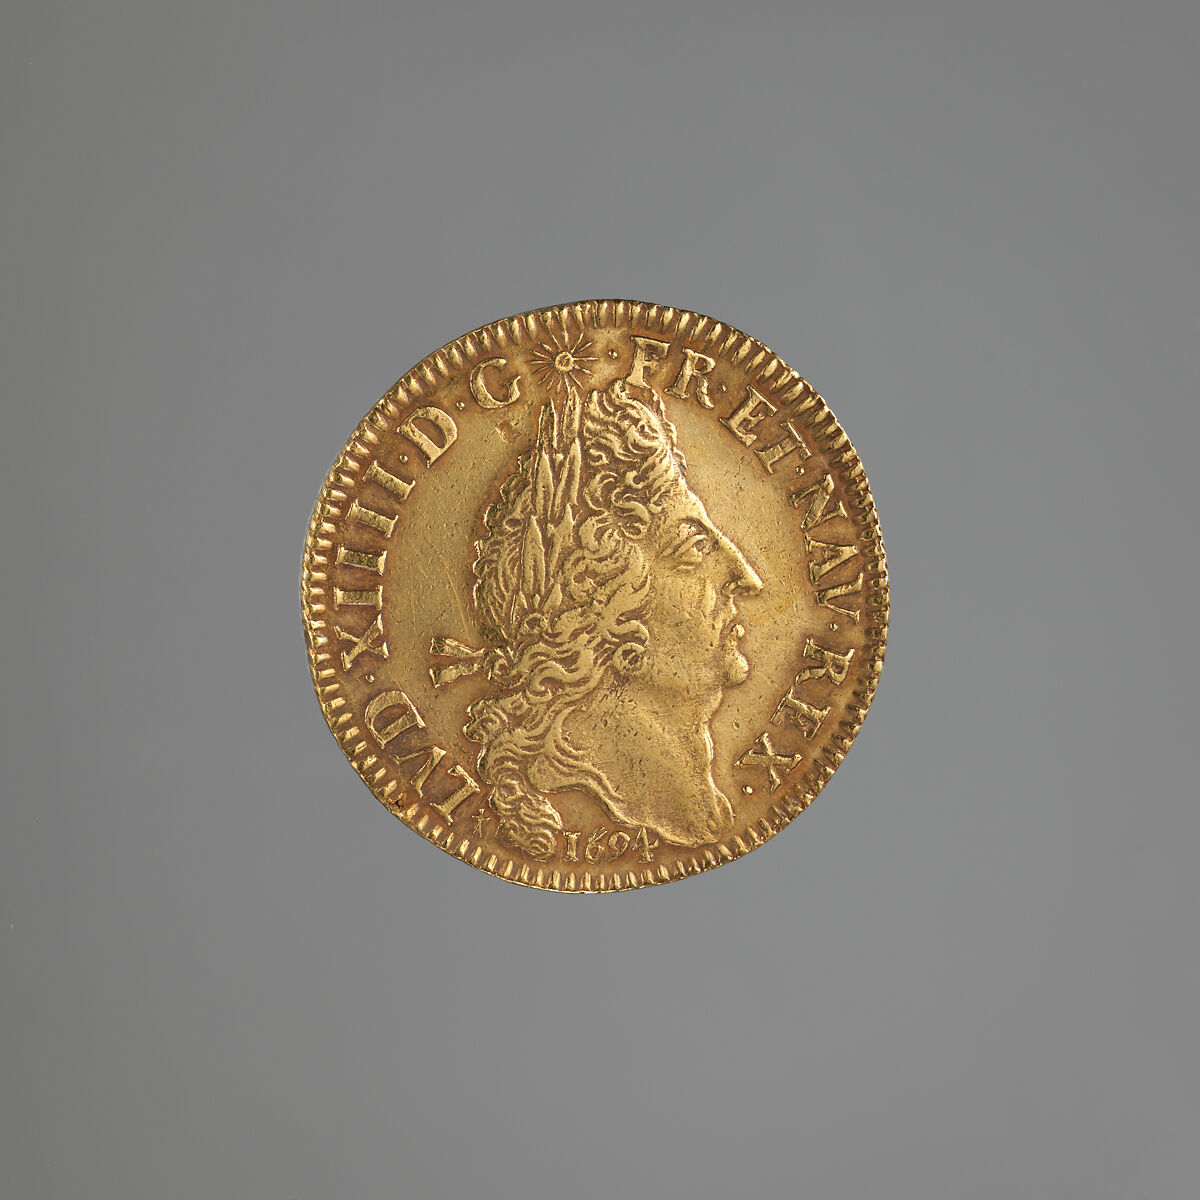 Double Louis d’or of Louis XIV of France (b.1638; r. 1643–1715), Gold, French 